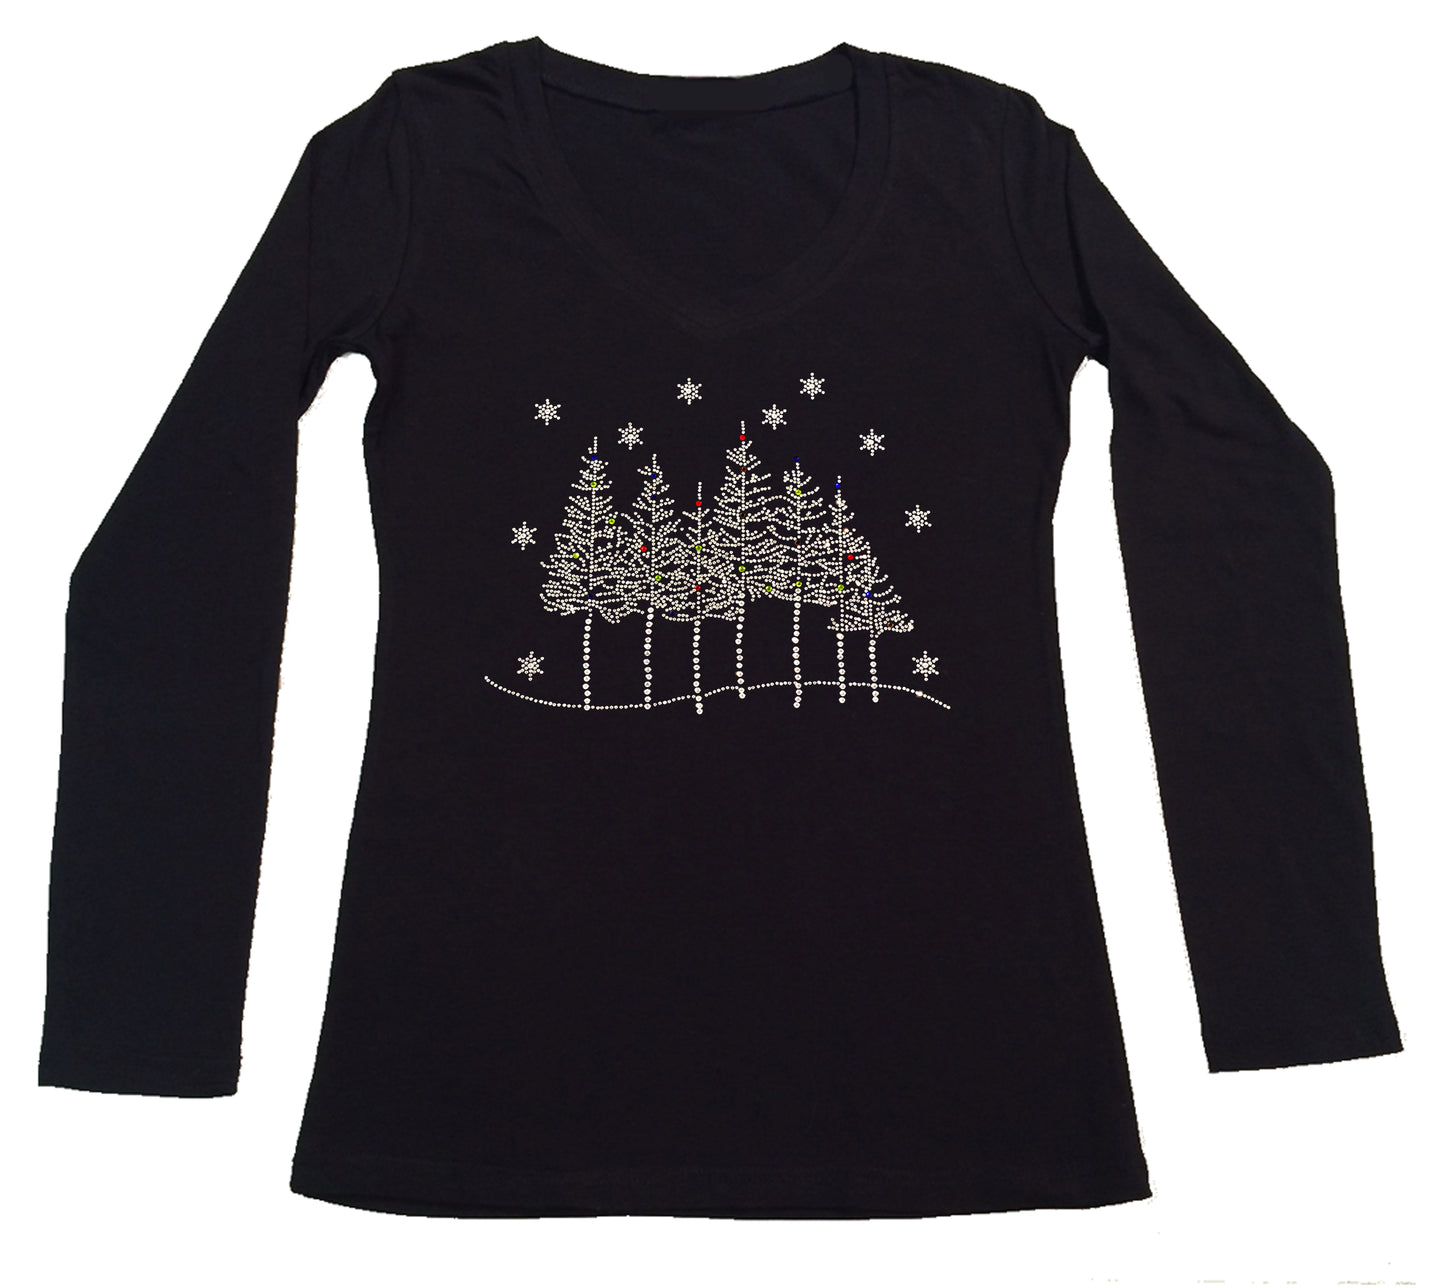 Womens T-shirt with Tree Line Scene with Snowflakes in Rhinestones